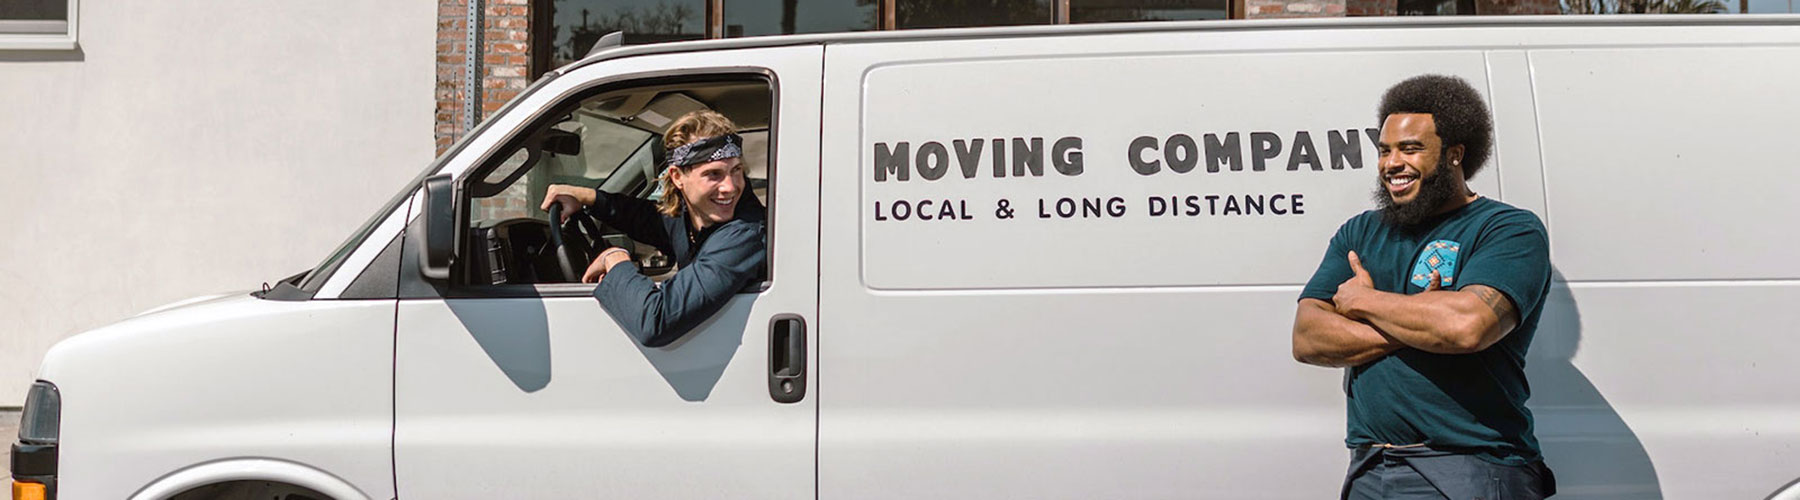 Happy movers by moving van